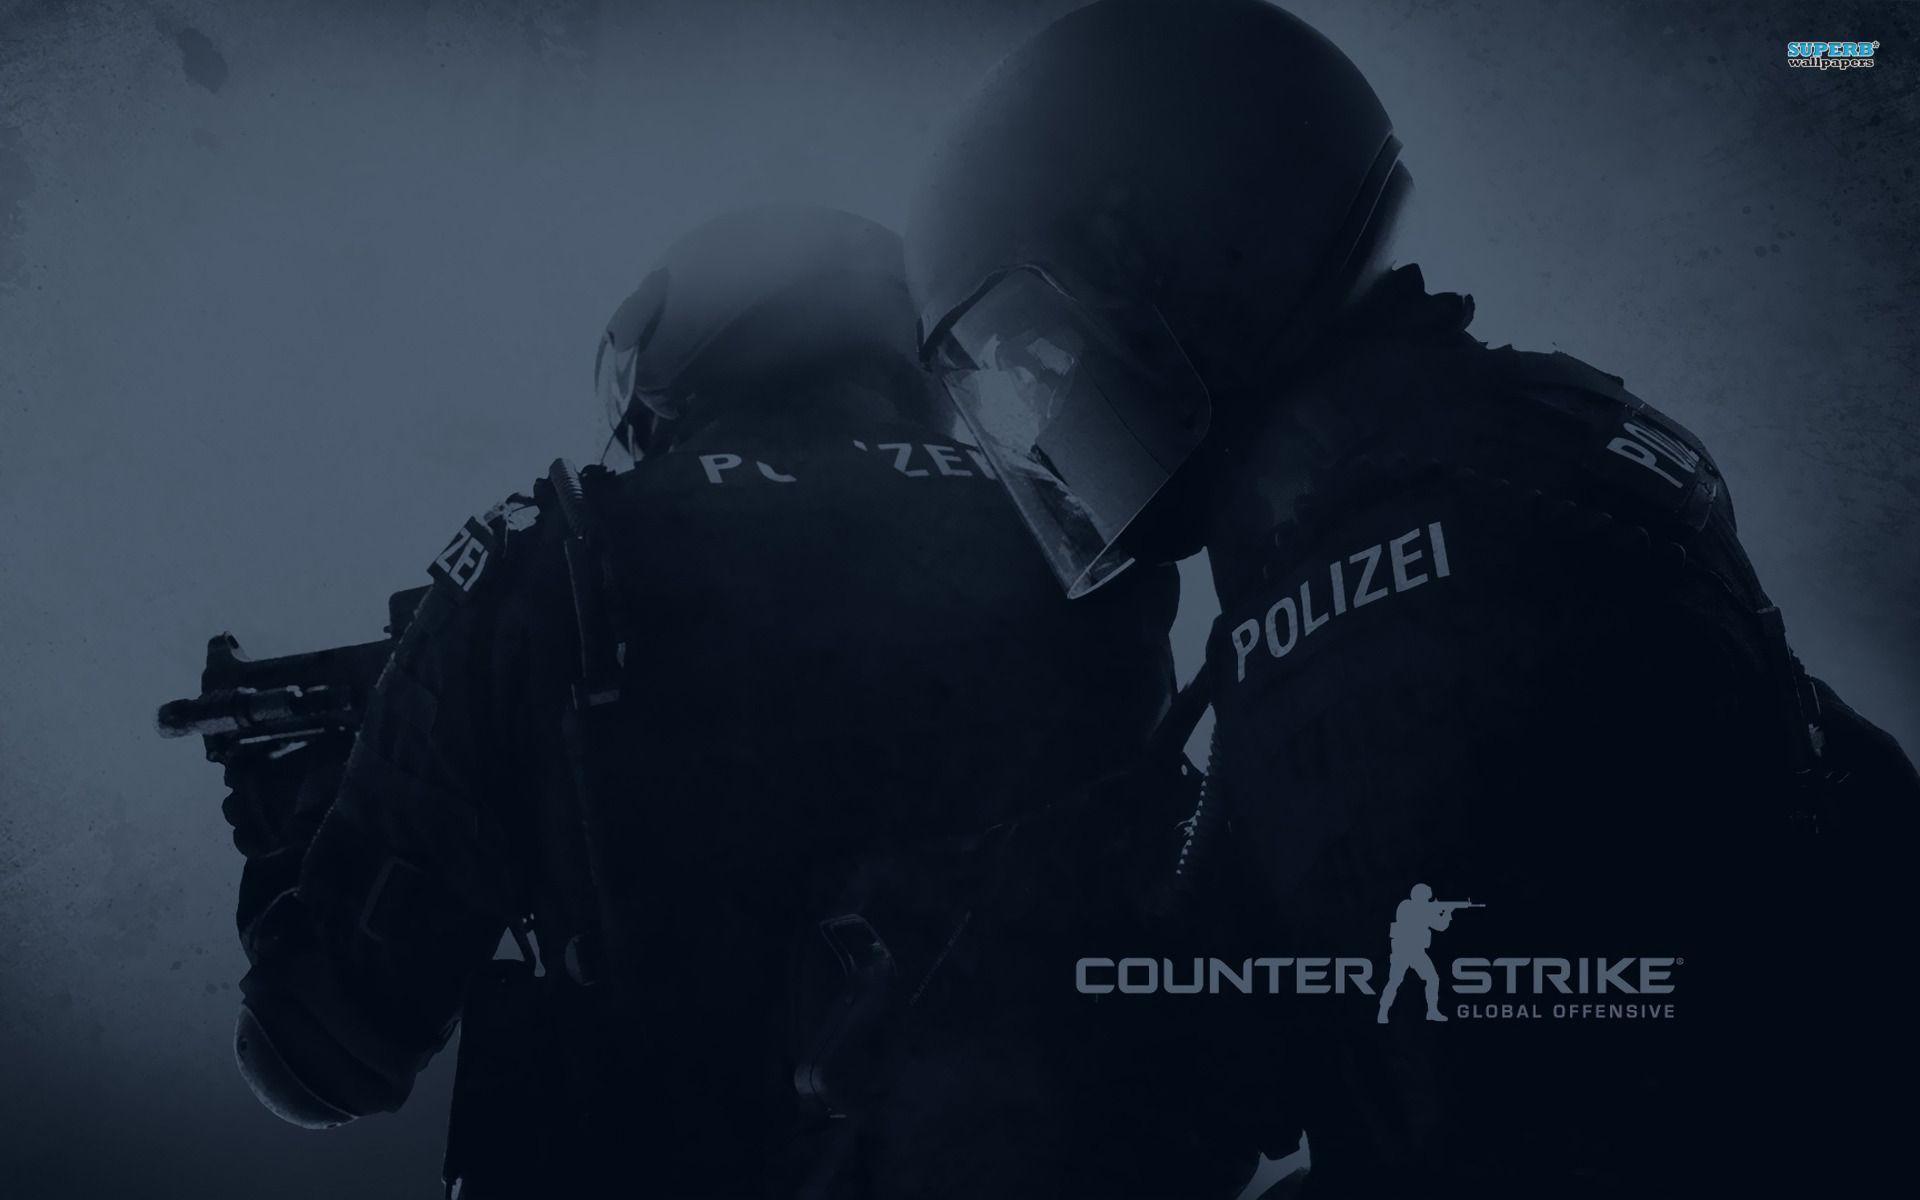 Counter Strike Global Offensive Wallpaper High Quality. Download